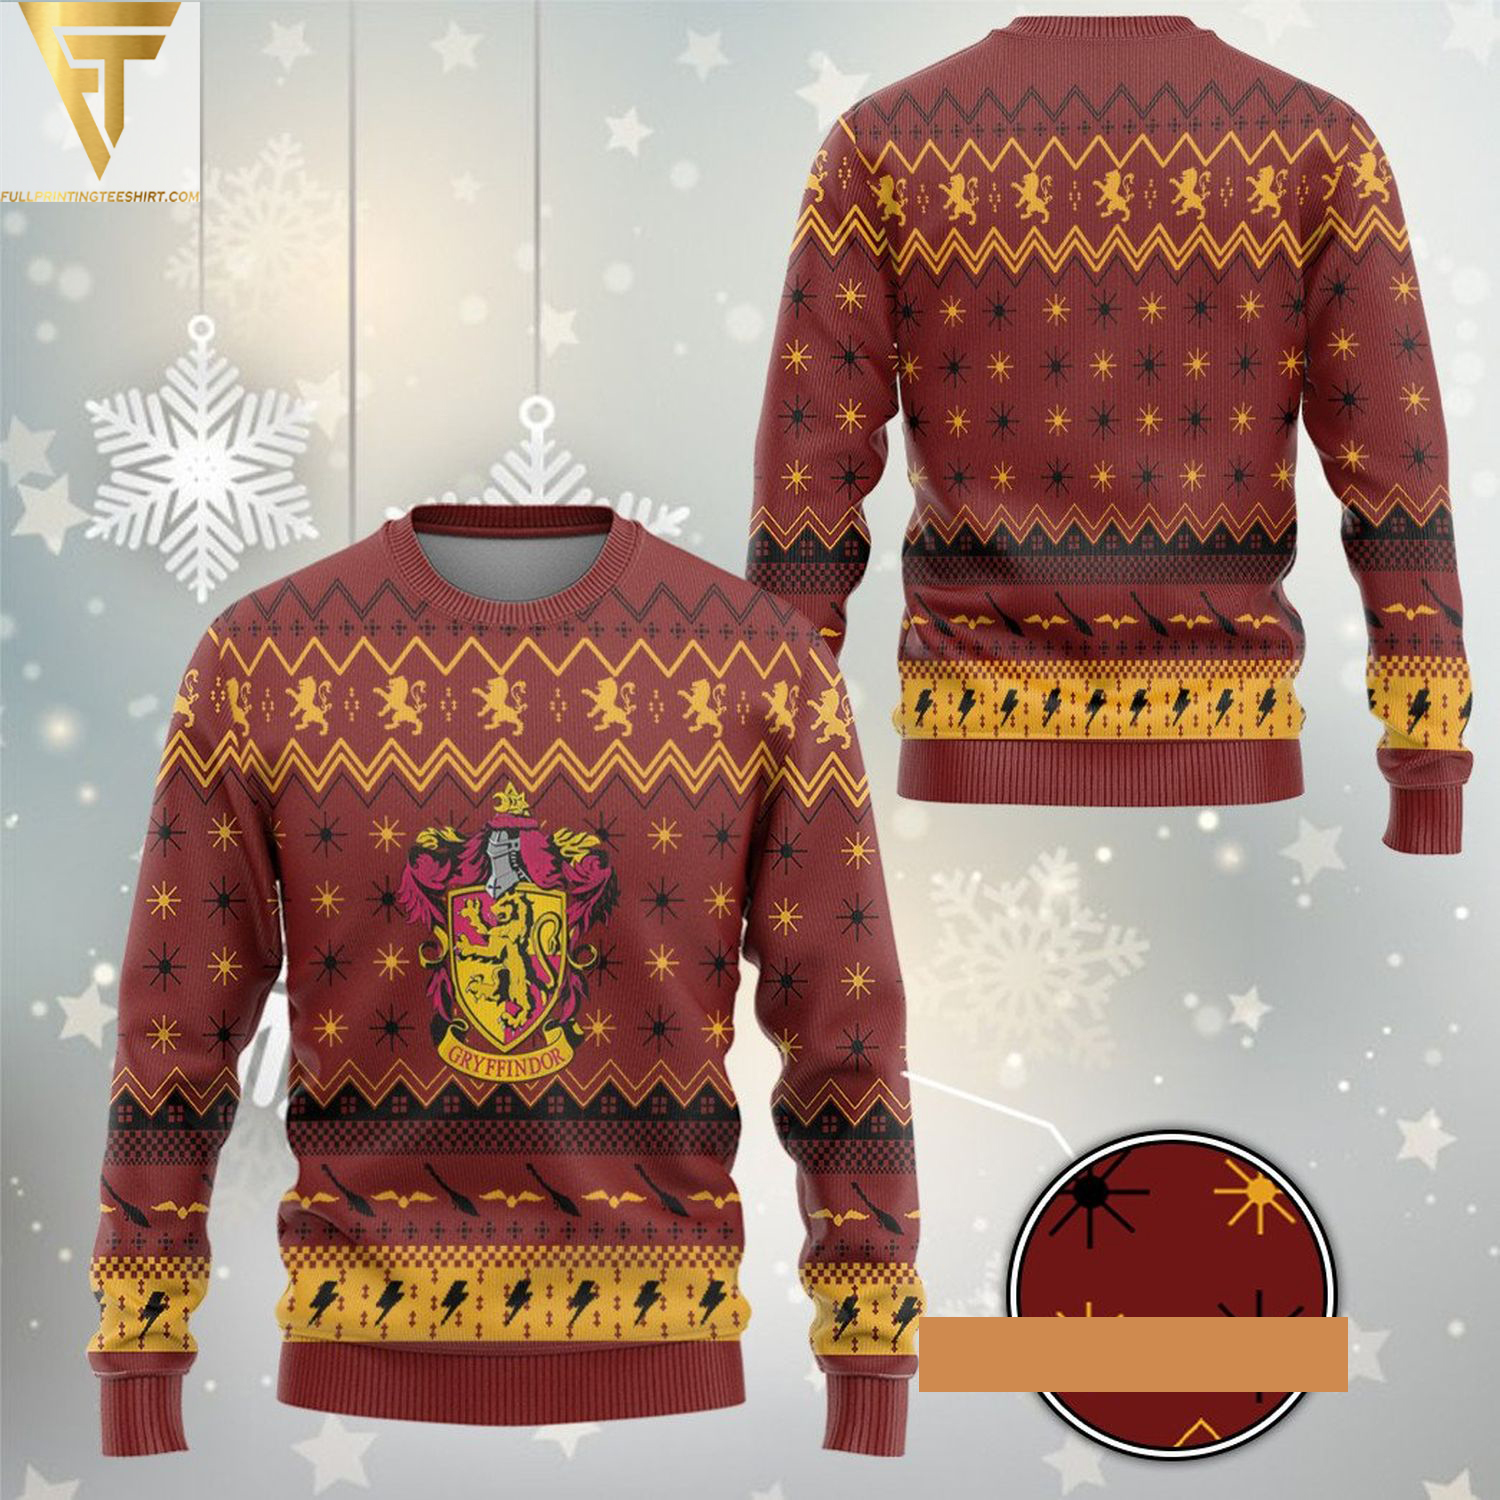 Harry potter gryffindor holiday ugly christmas sweater - Copy